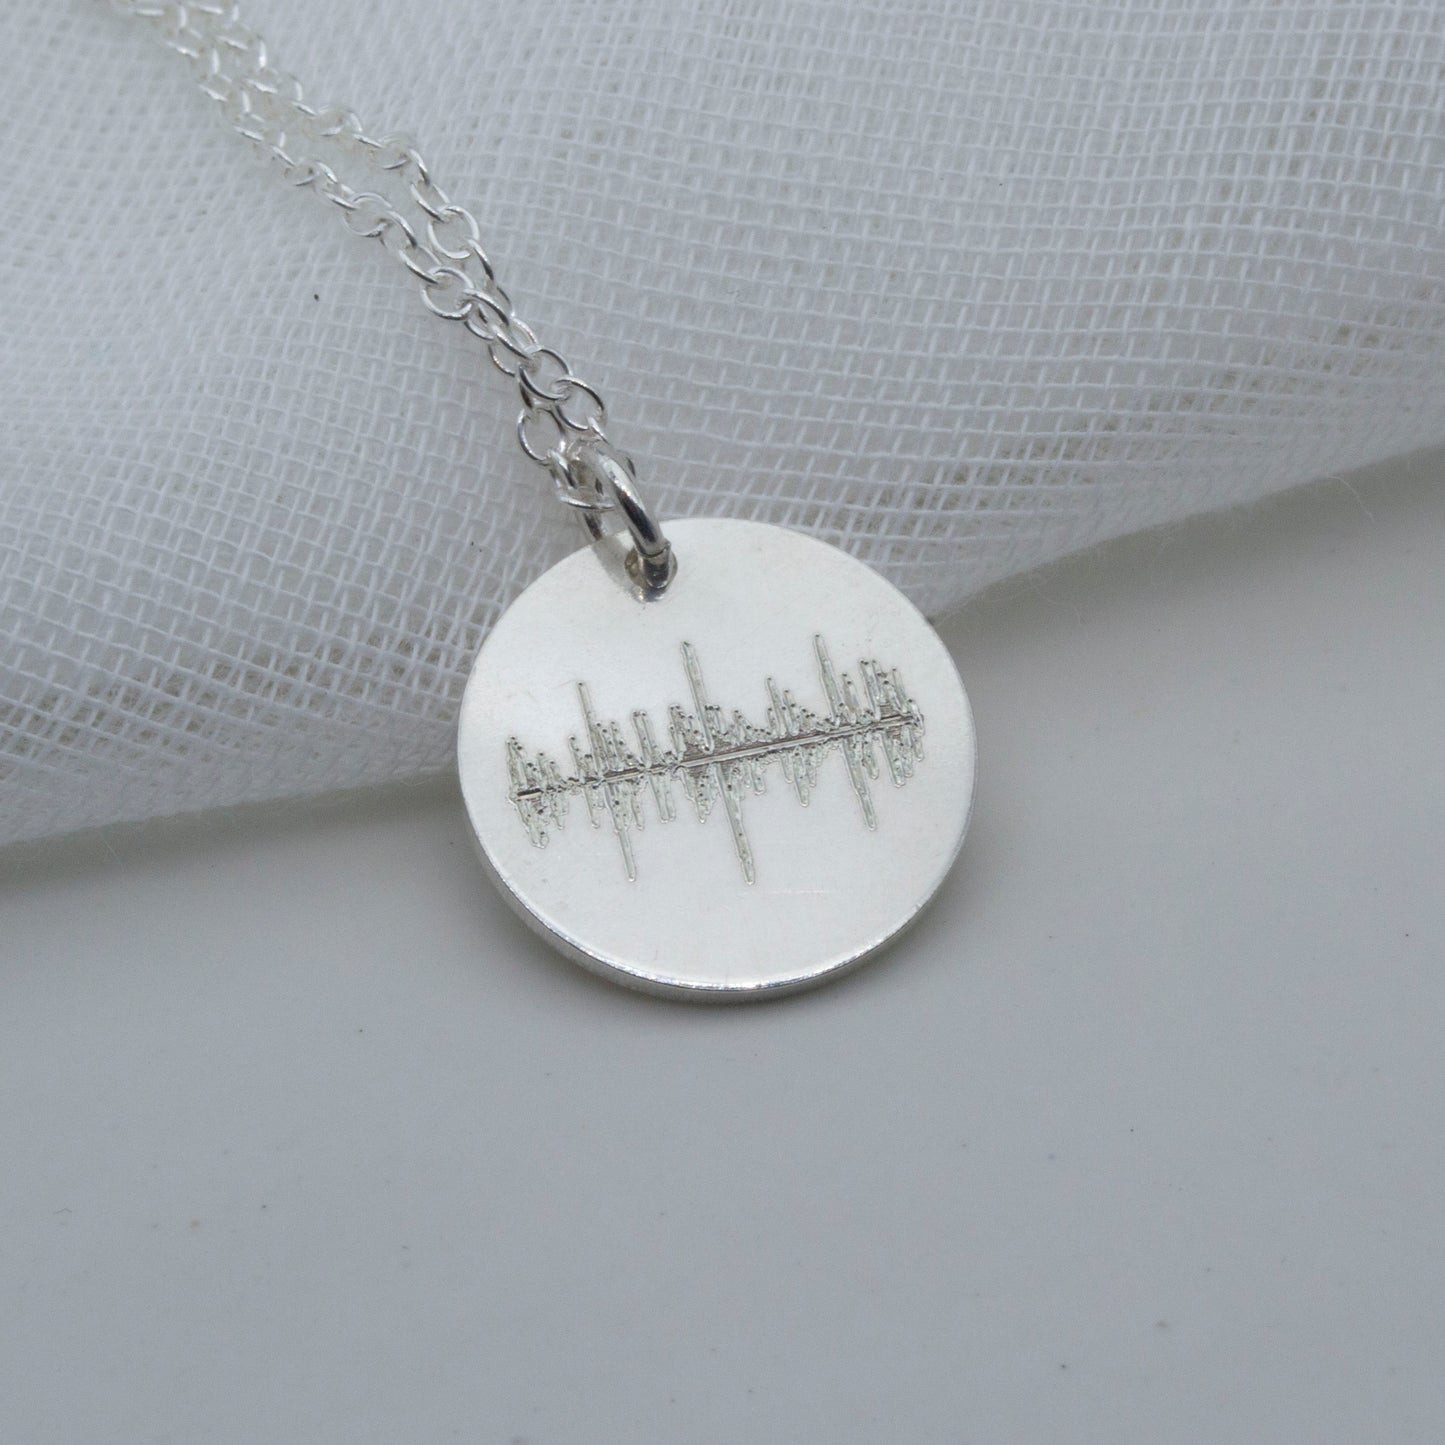 Soundwave pendant necklace in sterling silver - round